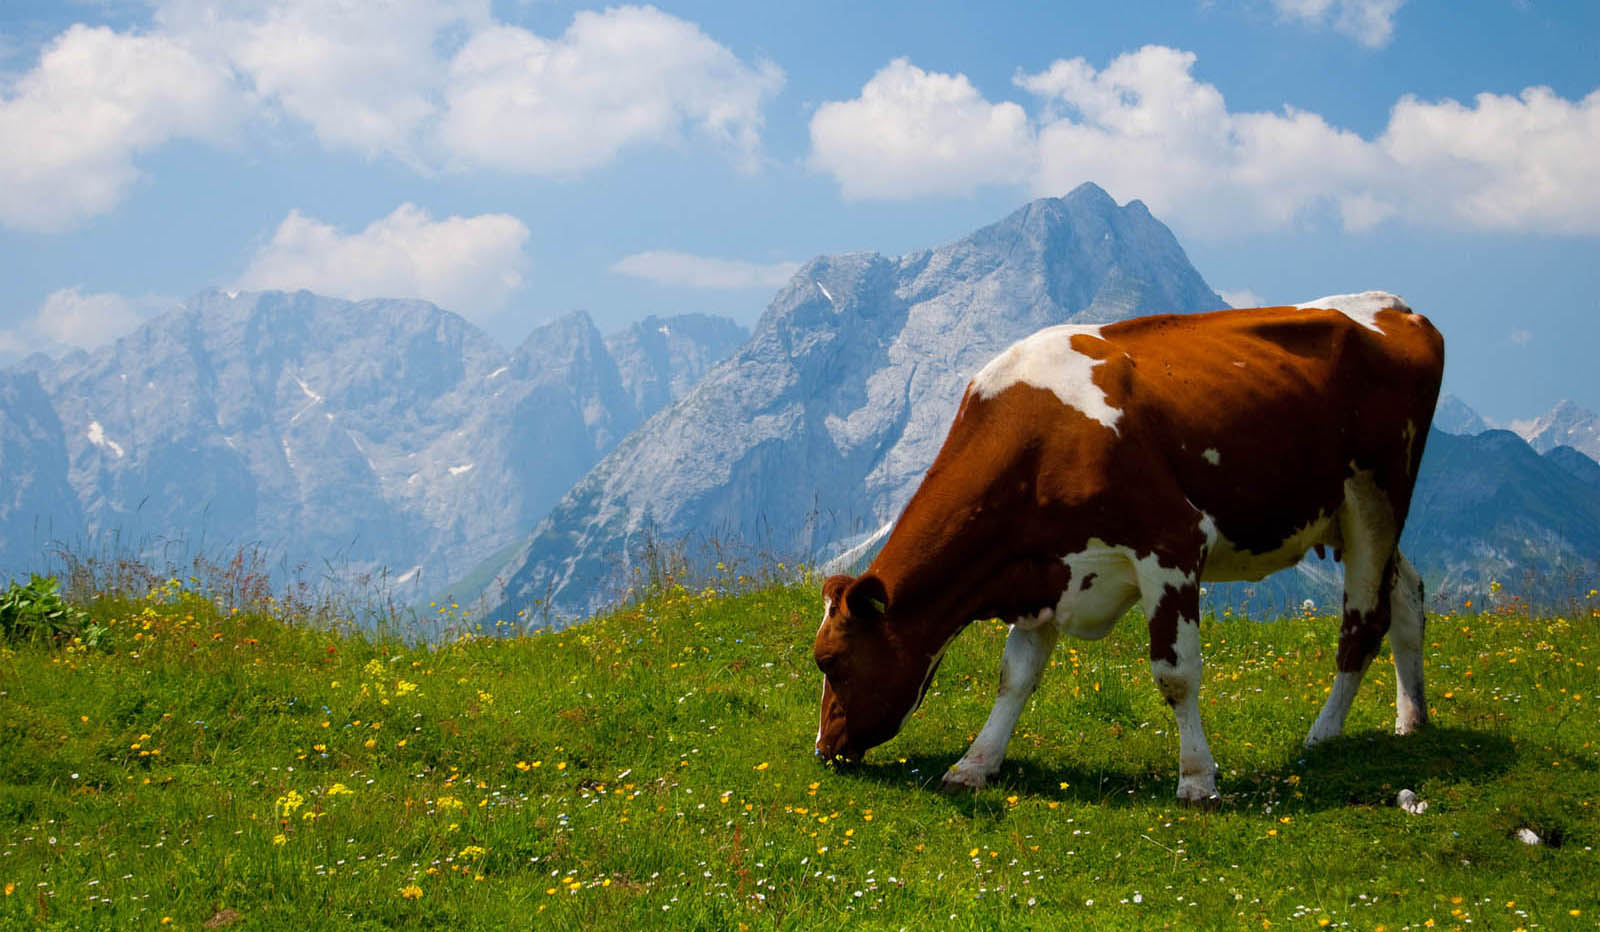 Cow Cute Wallpaper DailyBackground Daily Background In